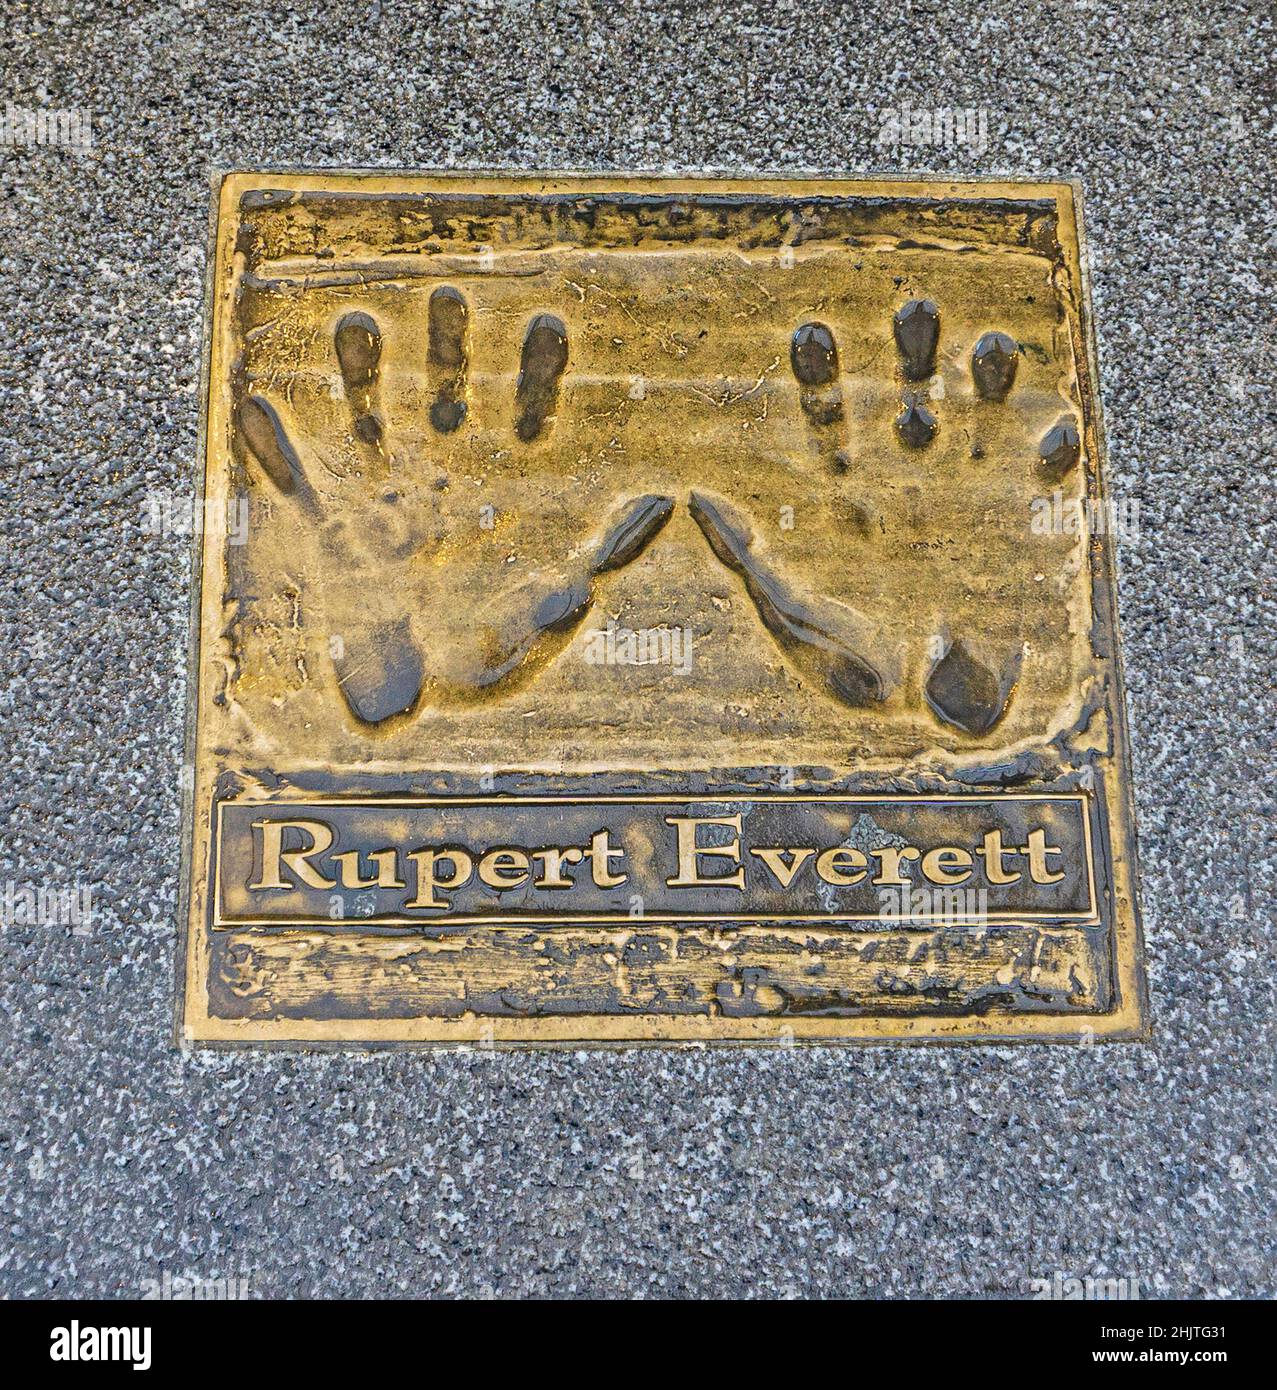 The handprints of Rupert Everett the actor, on the pavement outside the Gaiety Theatre in Dublin, Ireland. Stock Photo